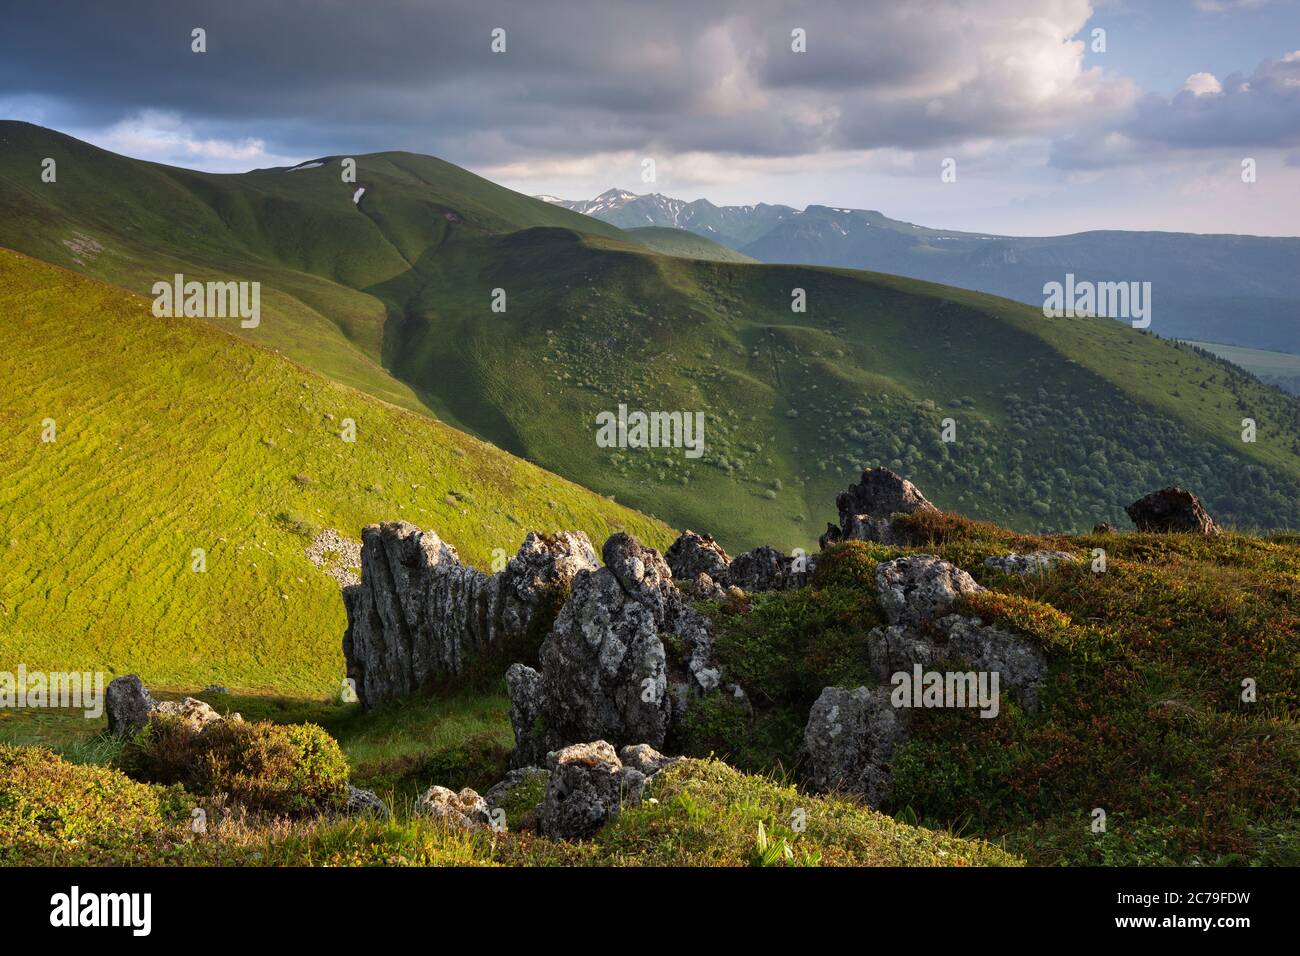 View to the Puy Sancy Mountain in the Central Massif Monts dore in the heart of the Auvergne, France. Evening Light. Stock Photo